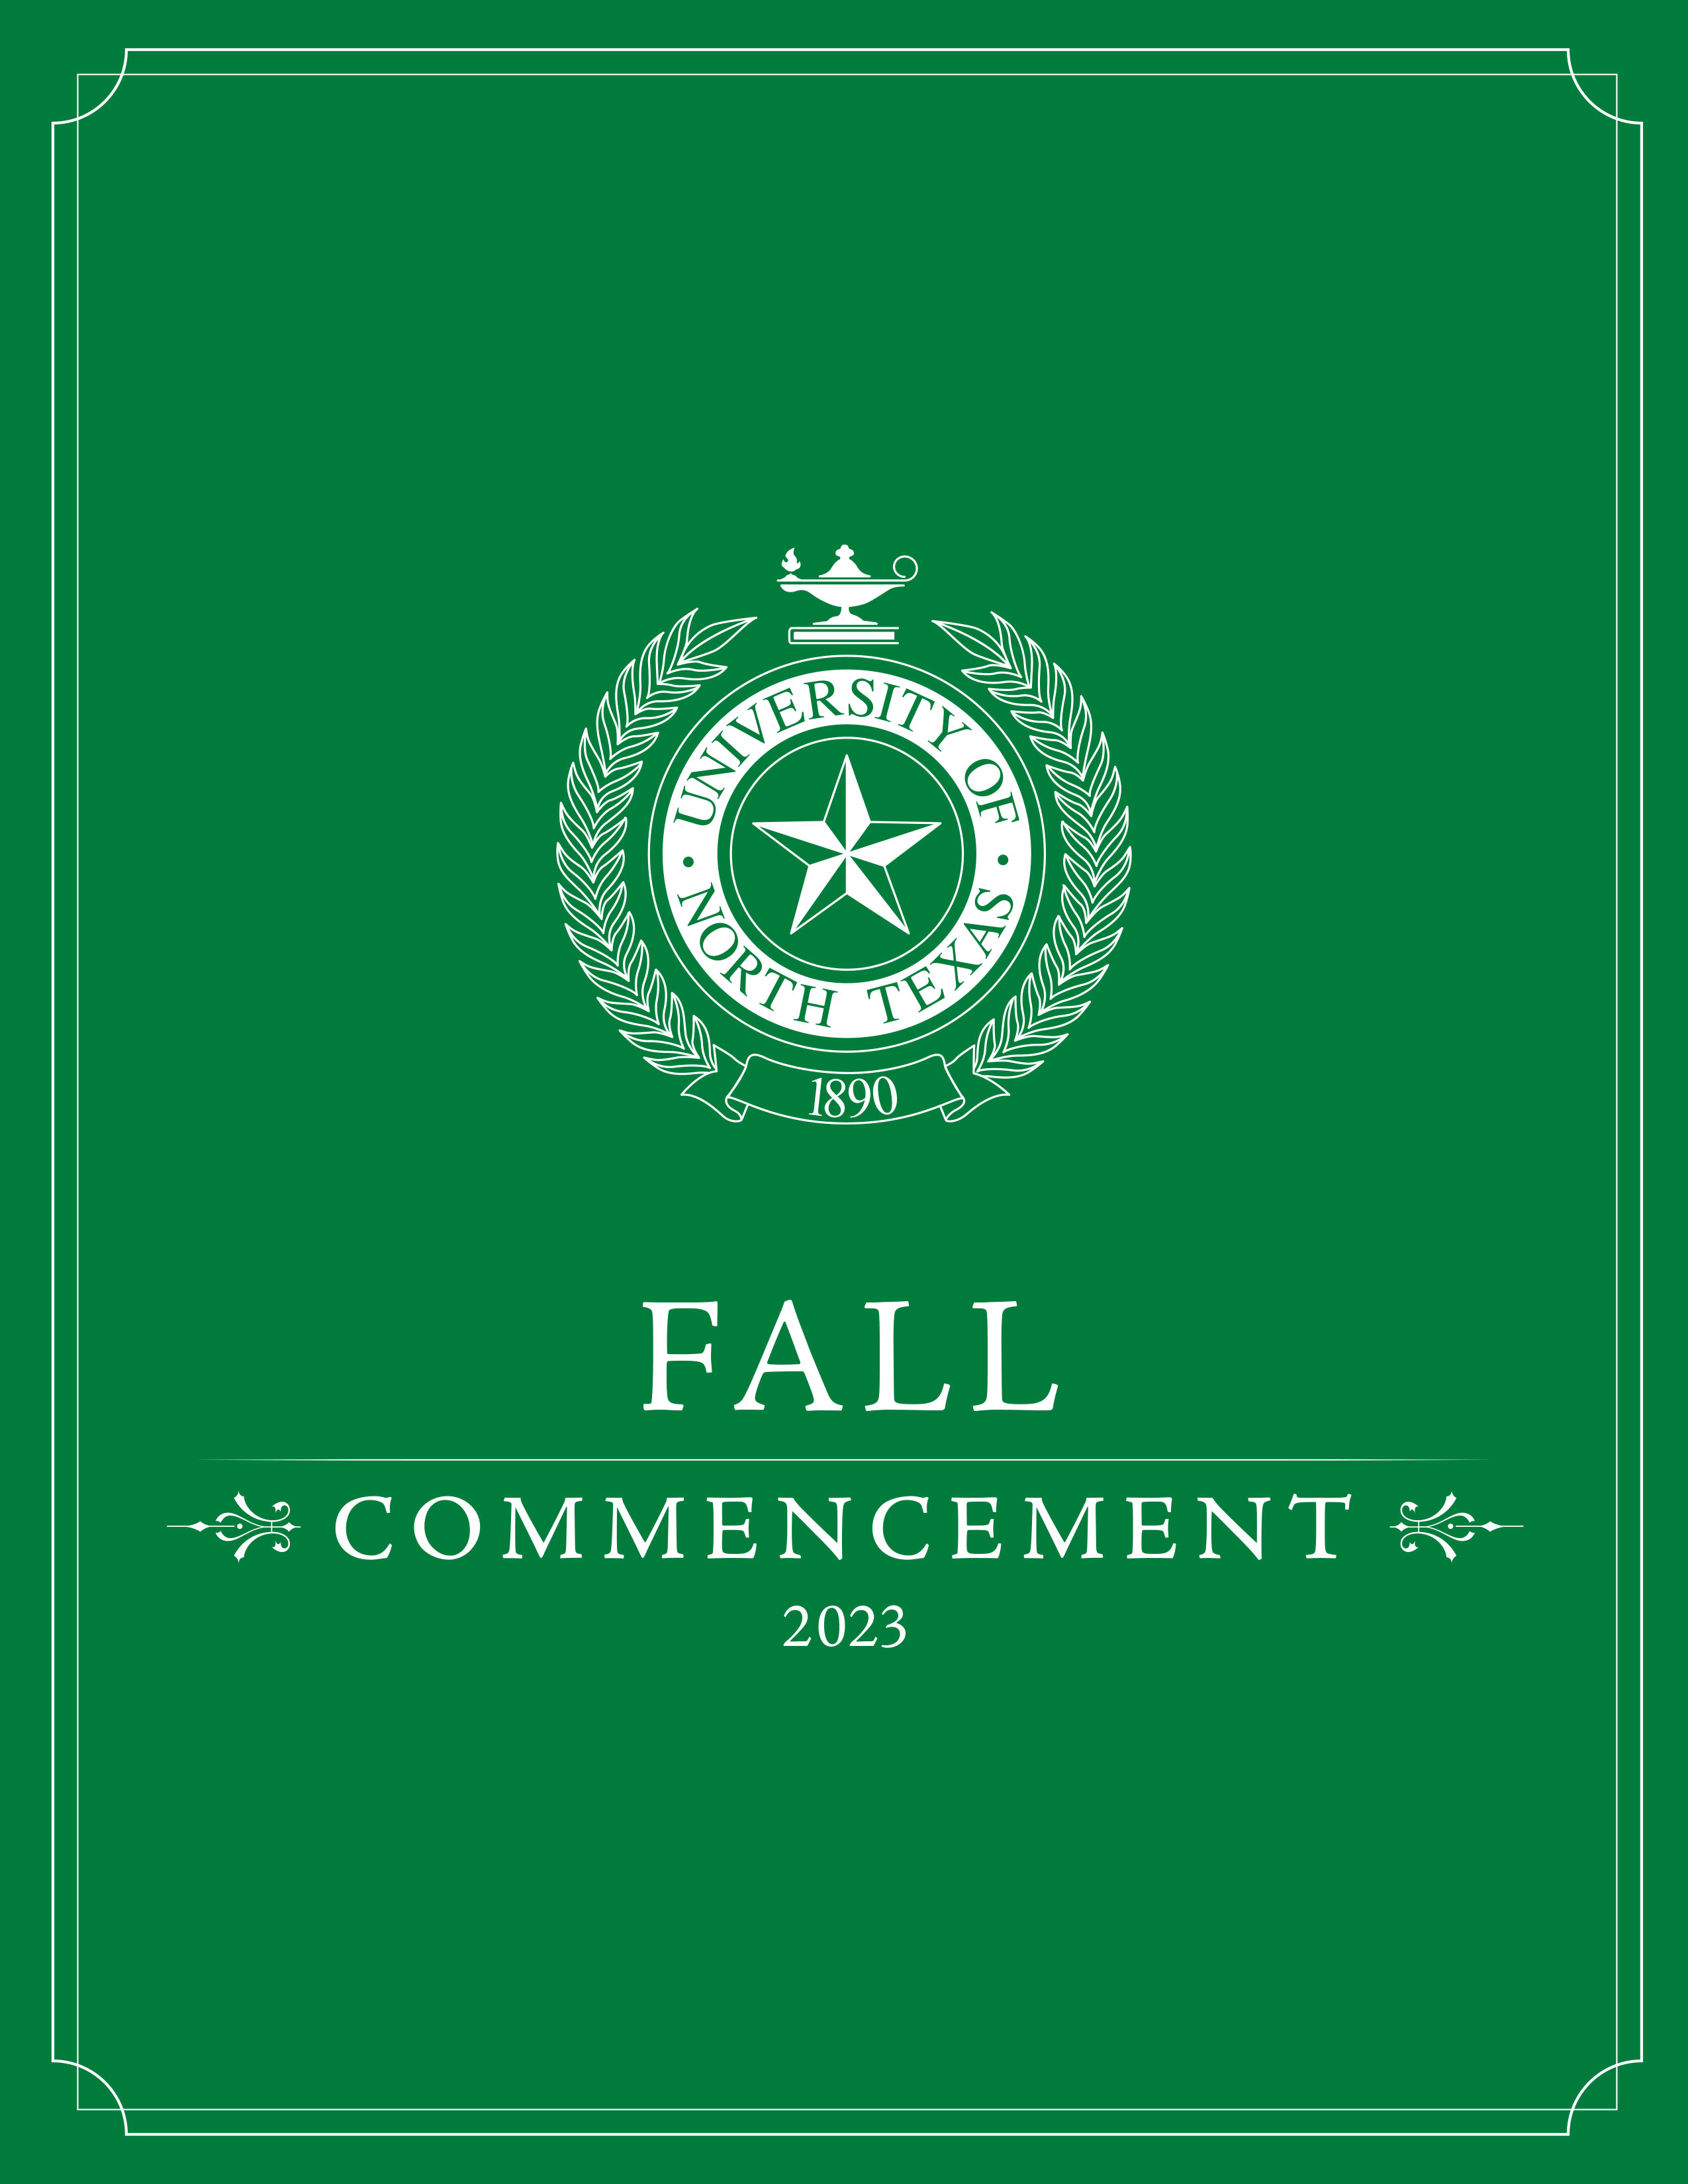 Fall 2023 Commencement program cover